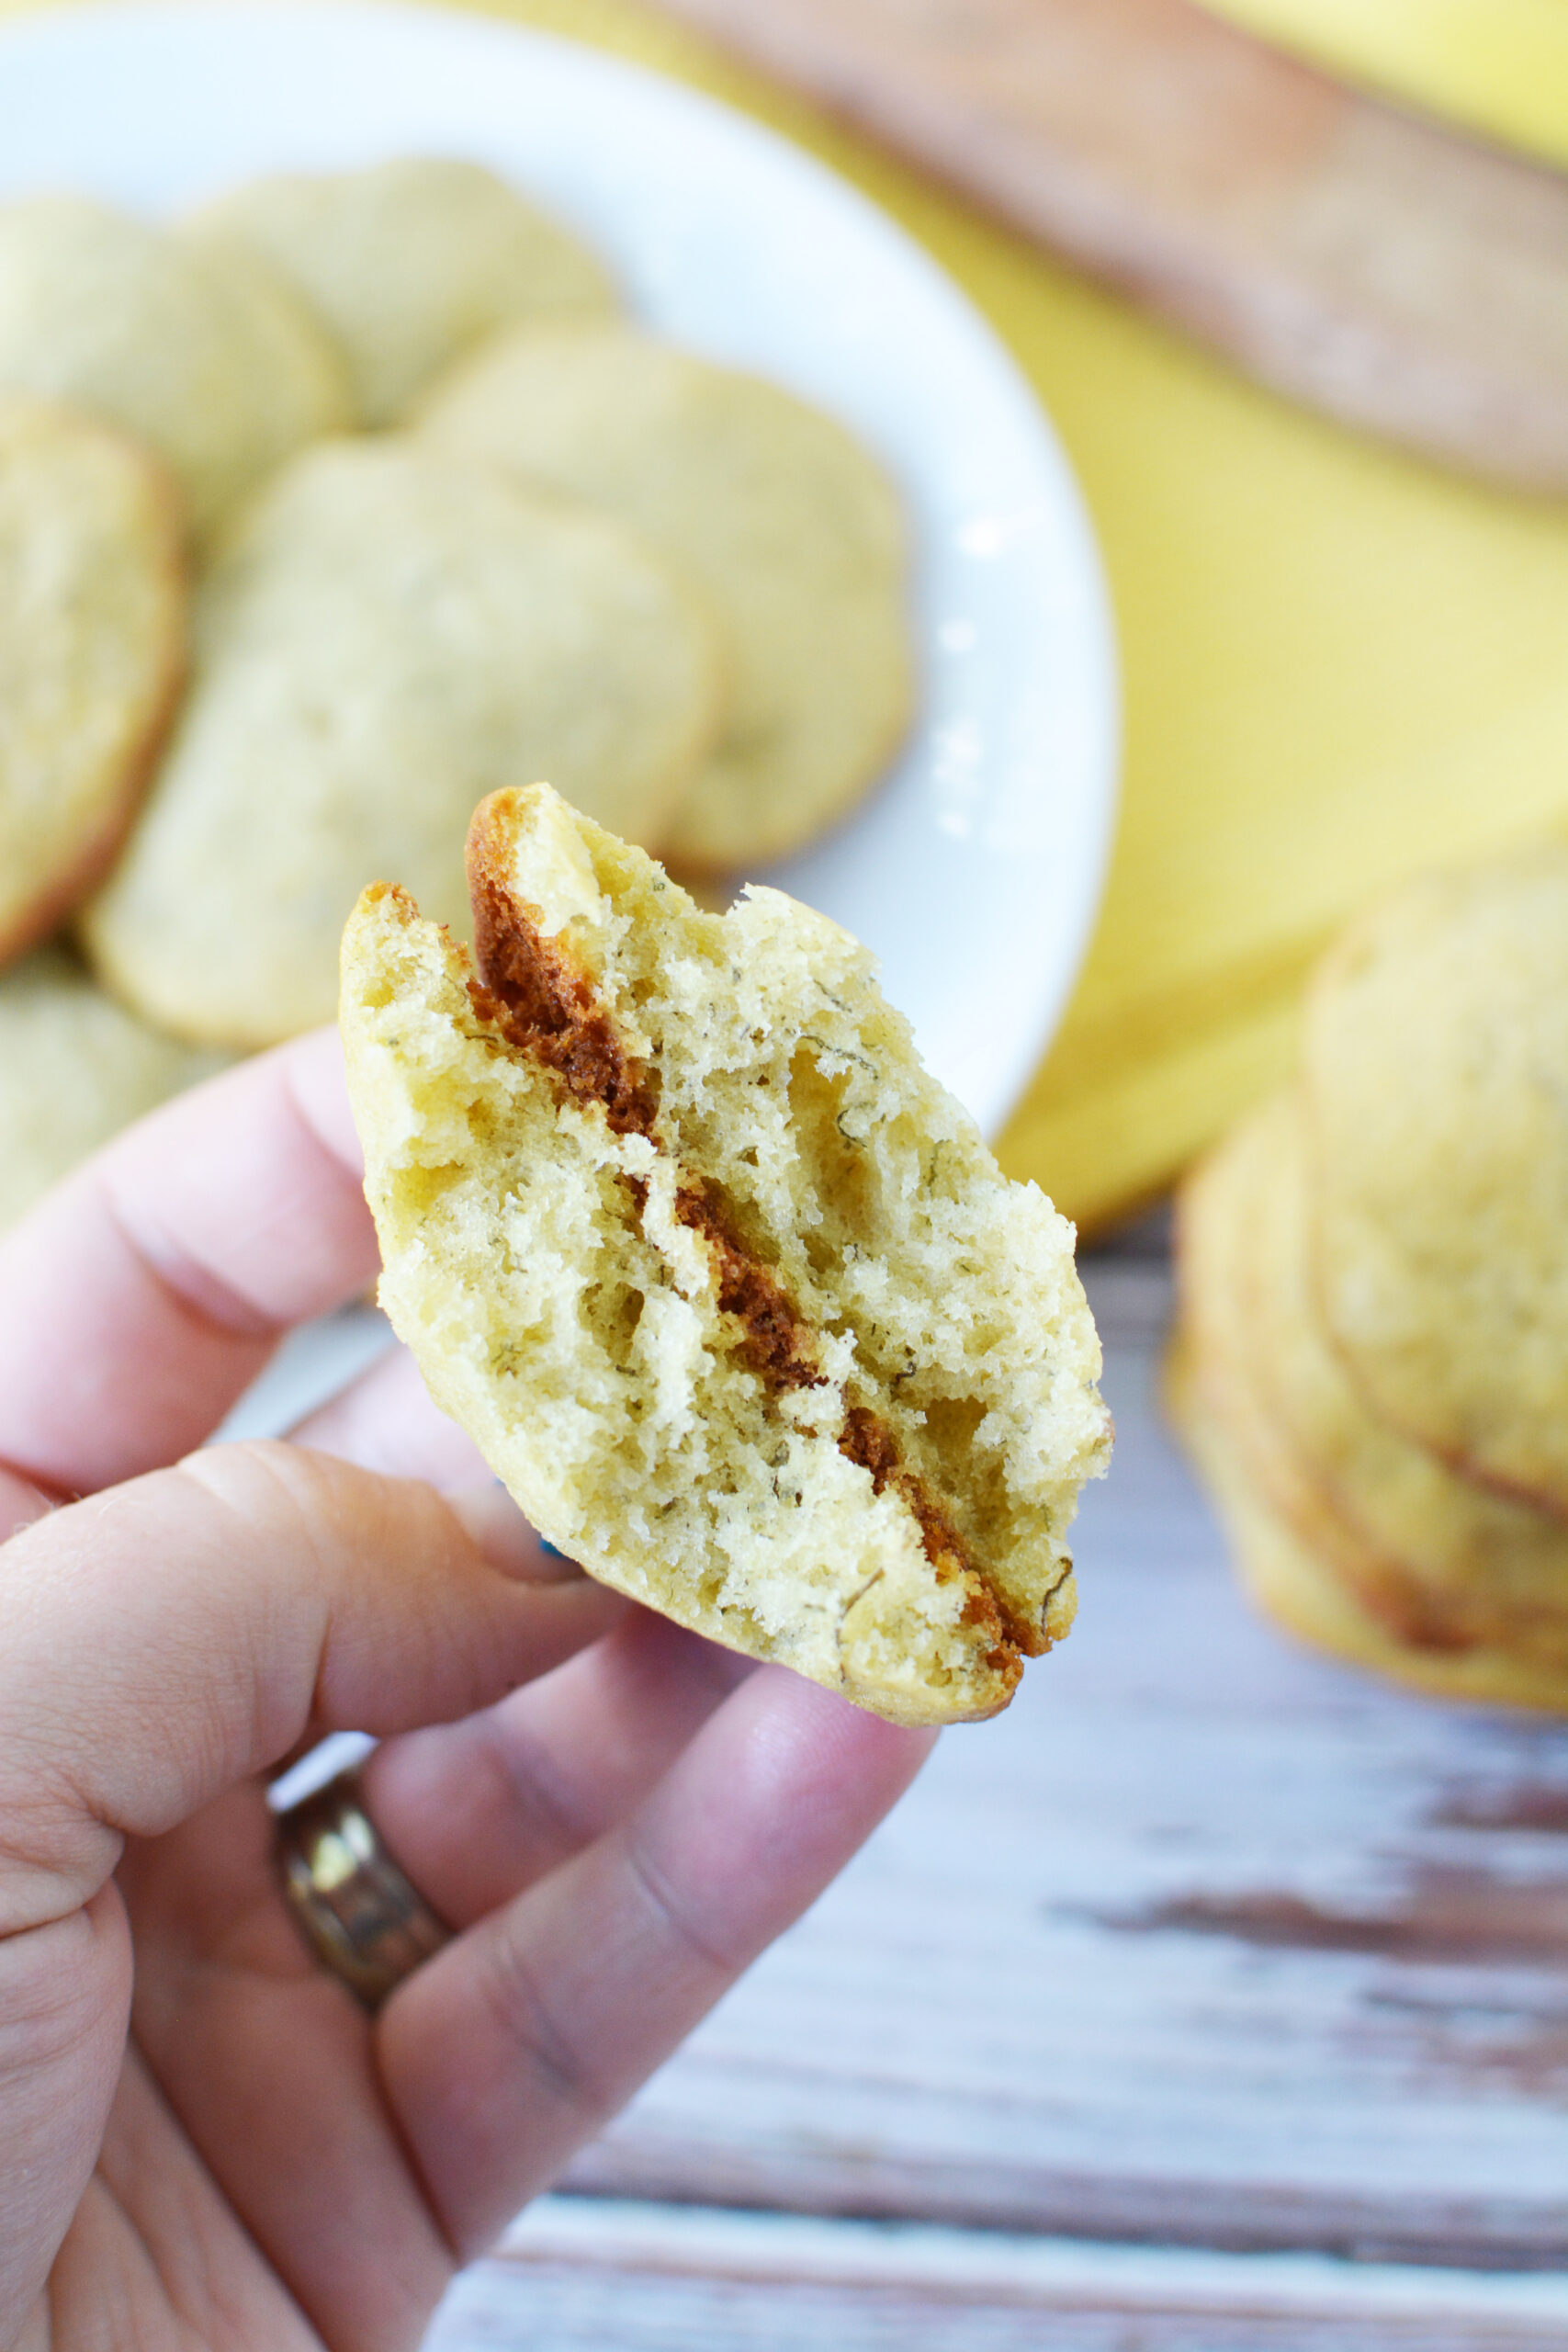 This Banana Bread Cookies Recipe Is The New Must-Make Dessert